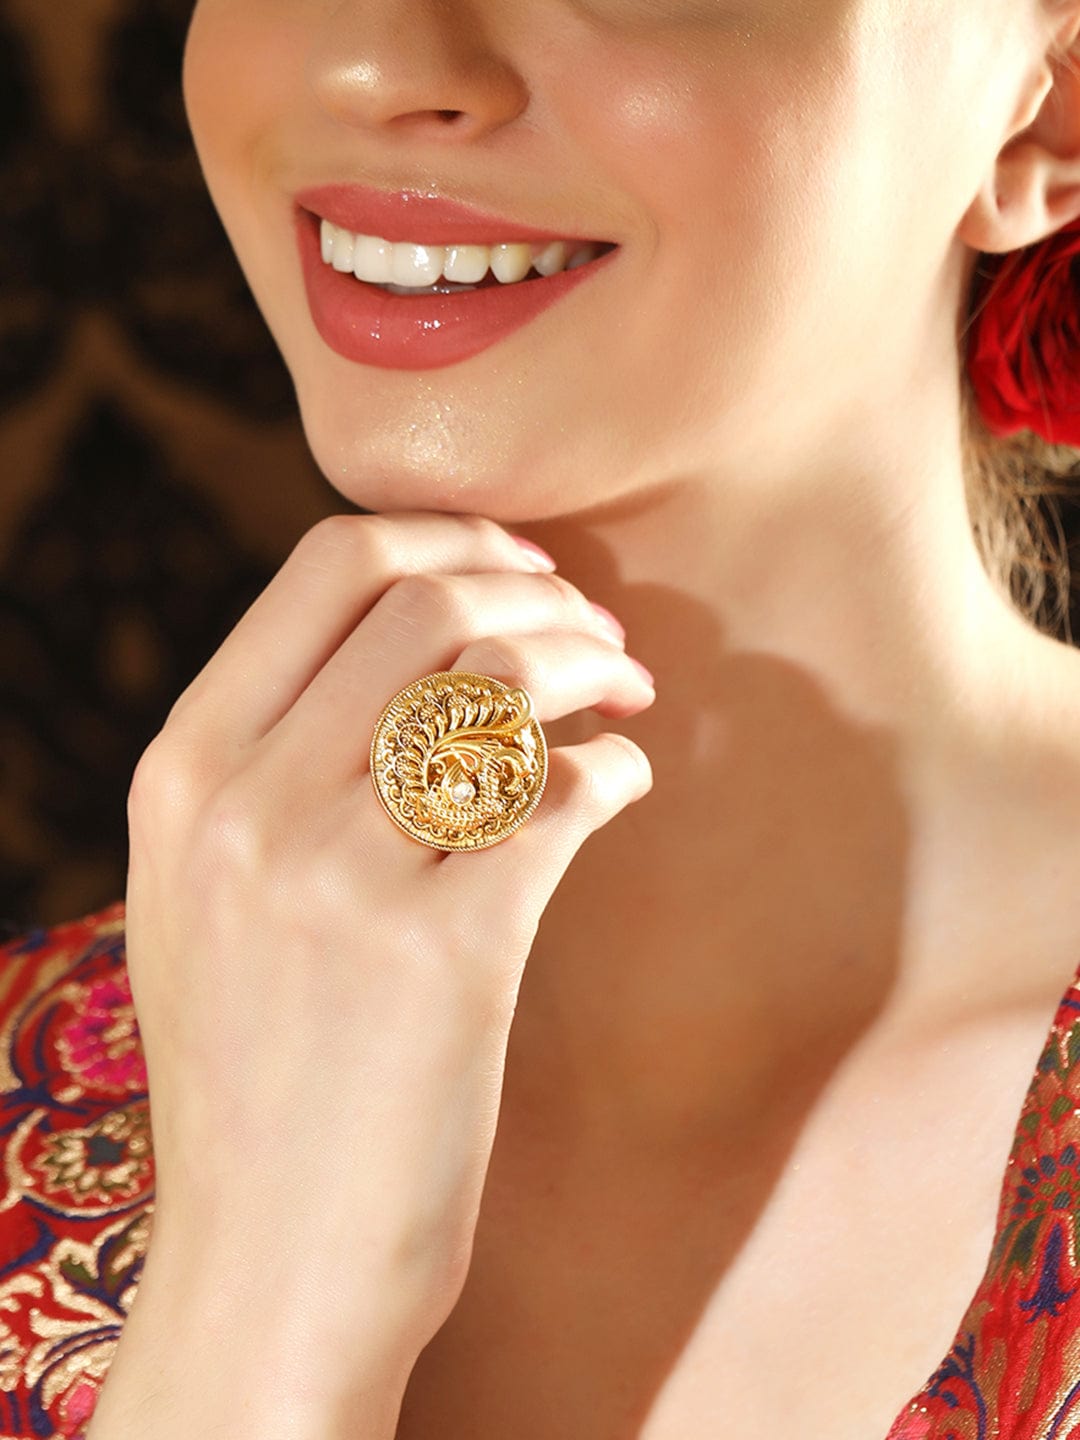 Rubans Luxury 22K Pure Gold Plated Finely Detailed Peacock Statememt Ring. Rings